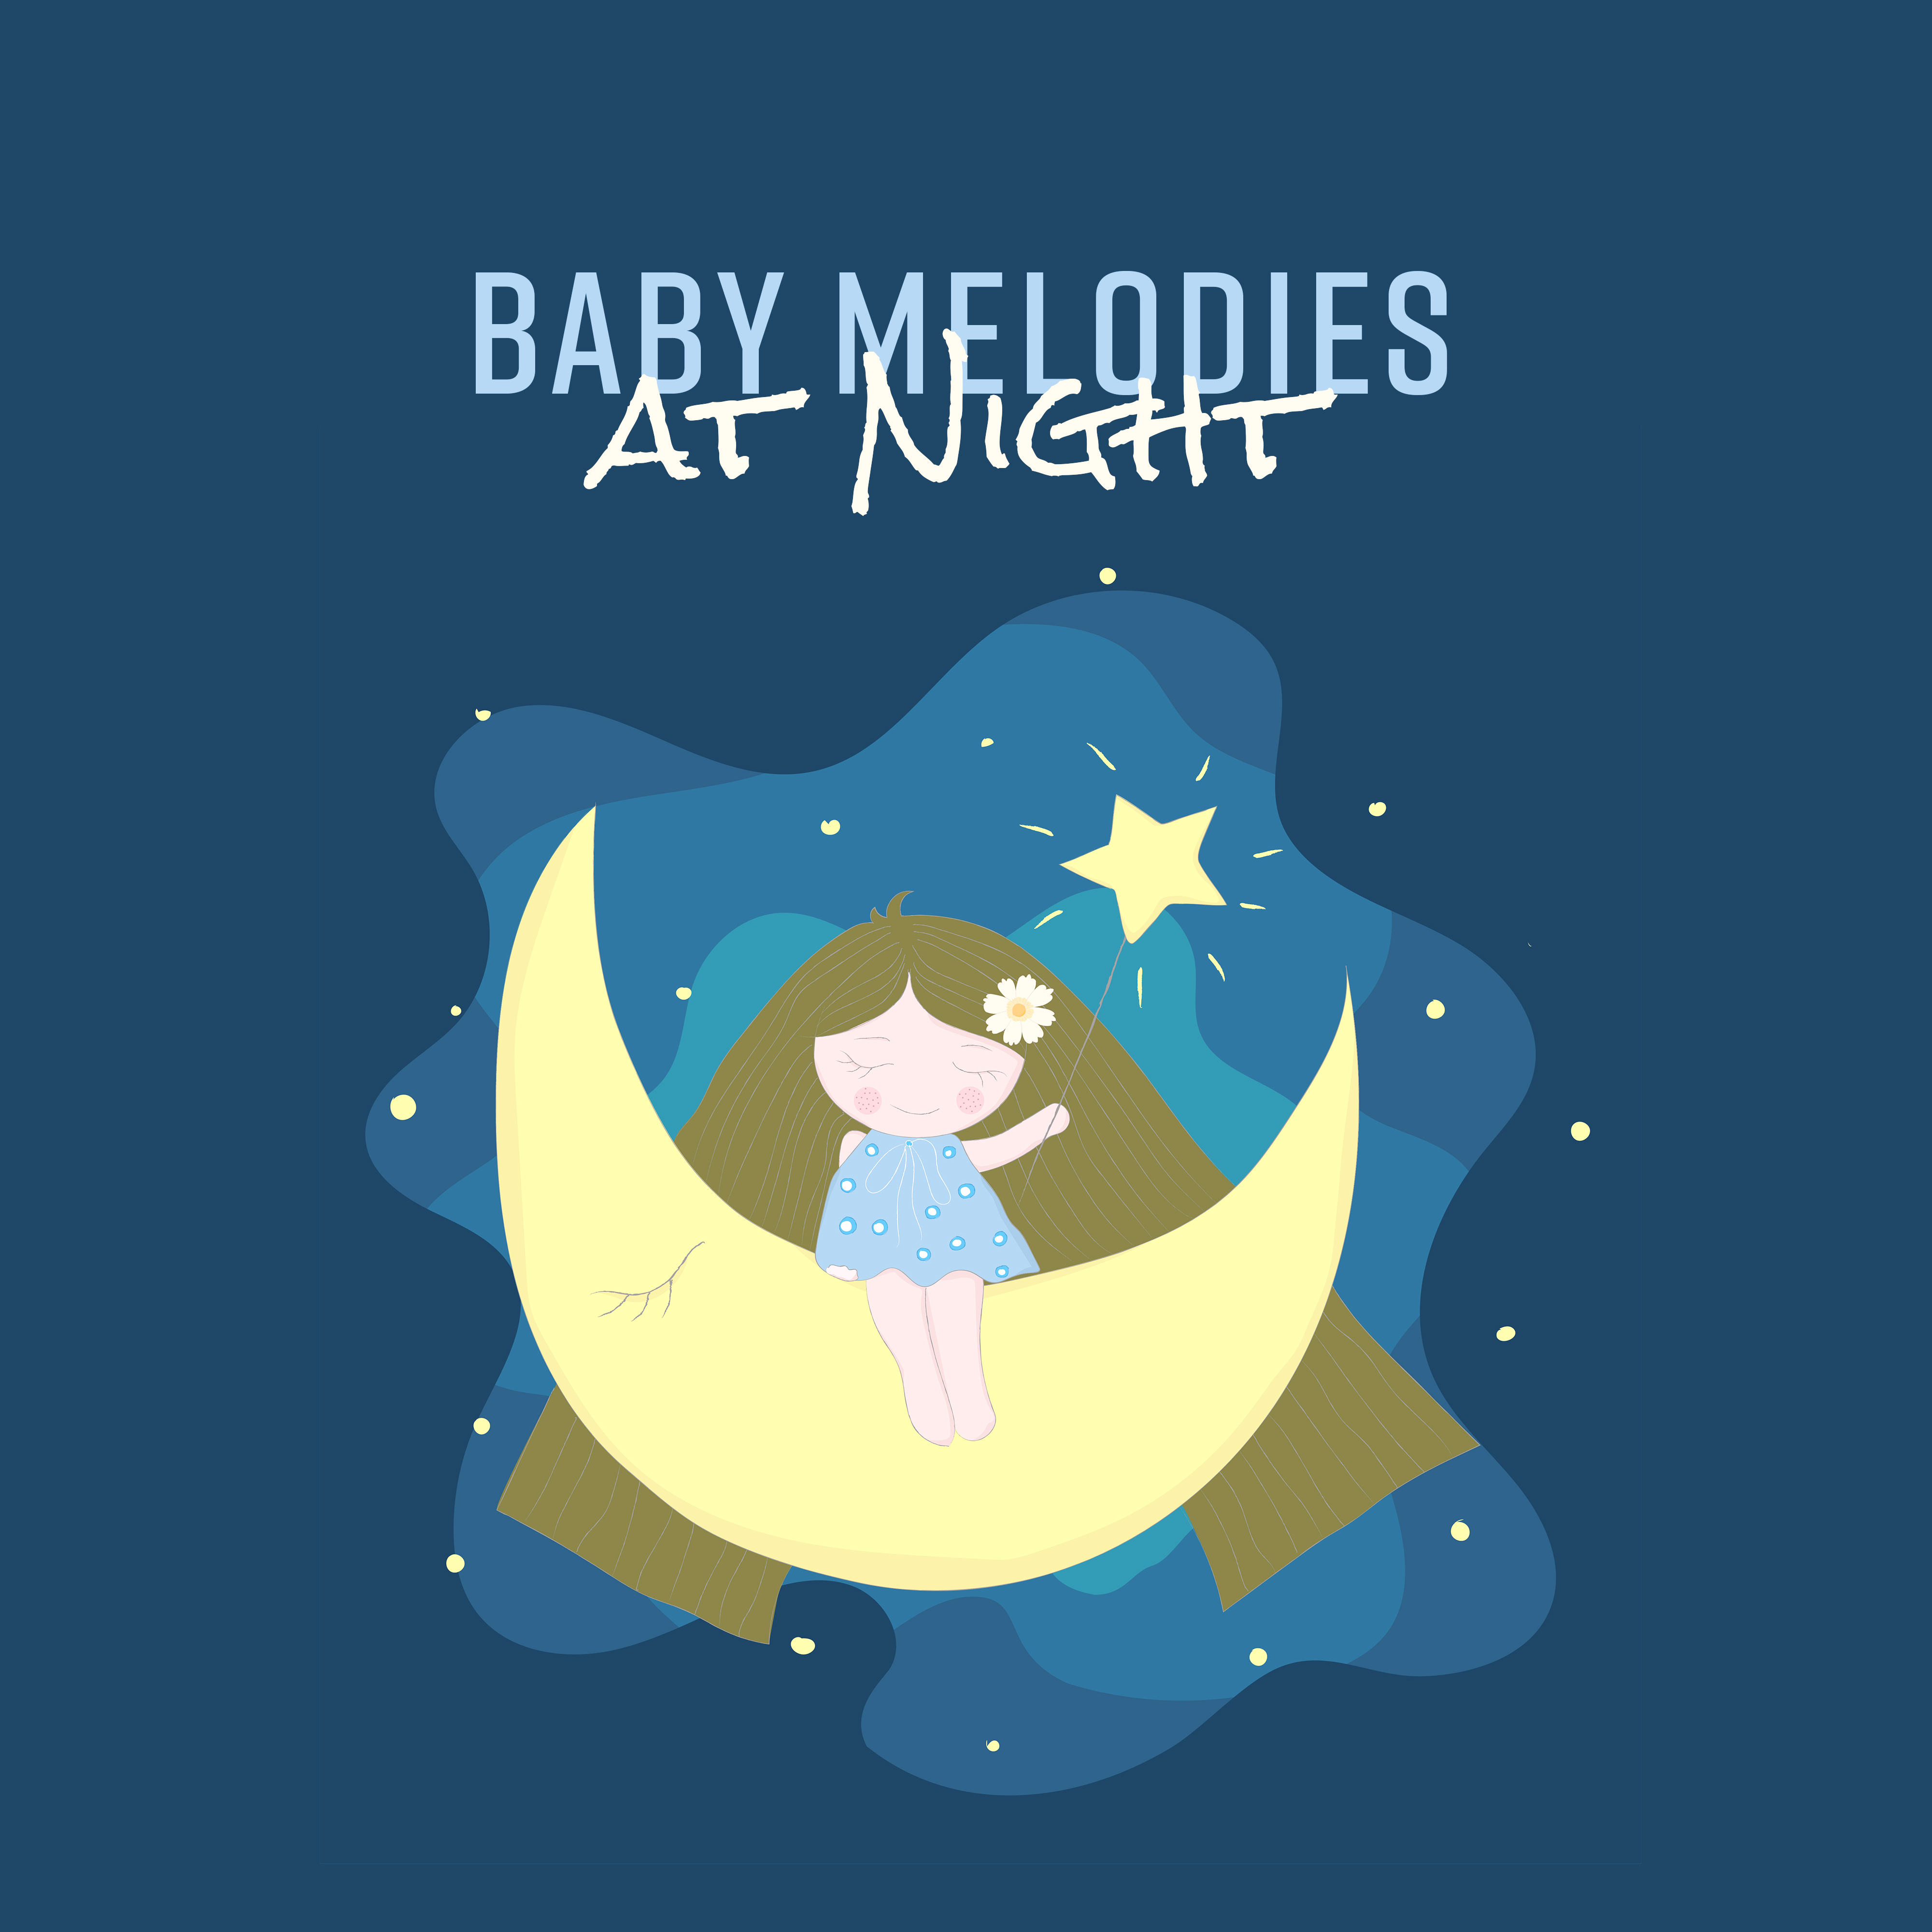 Baby Melodies at Night